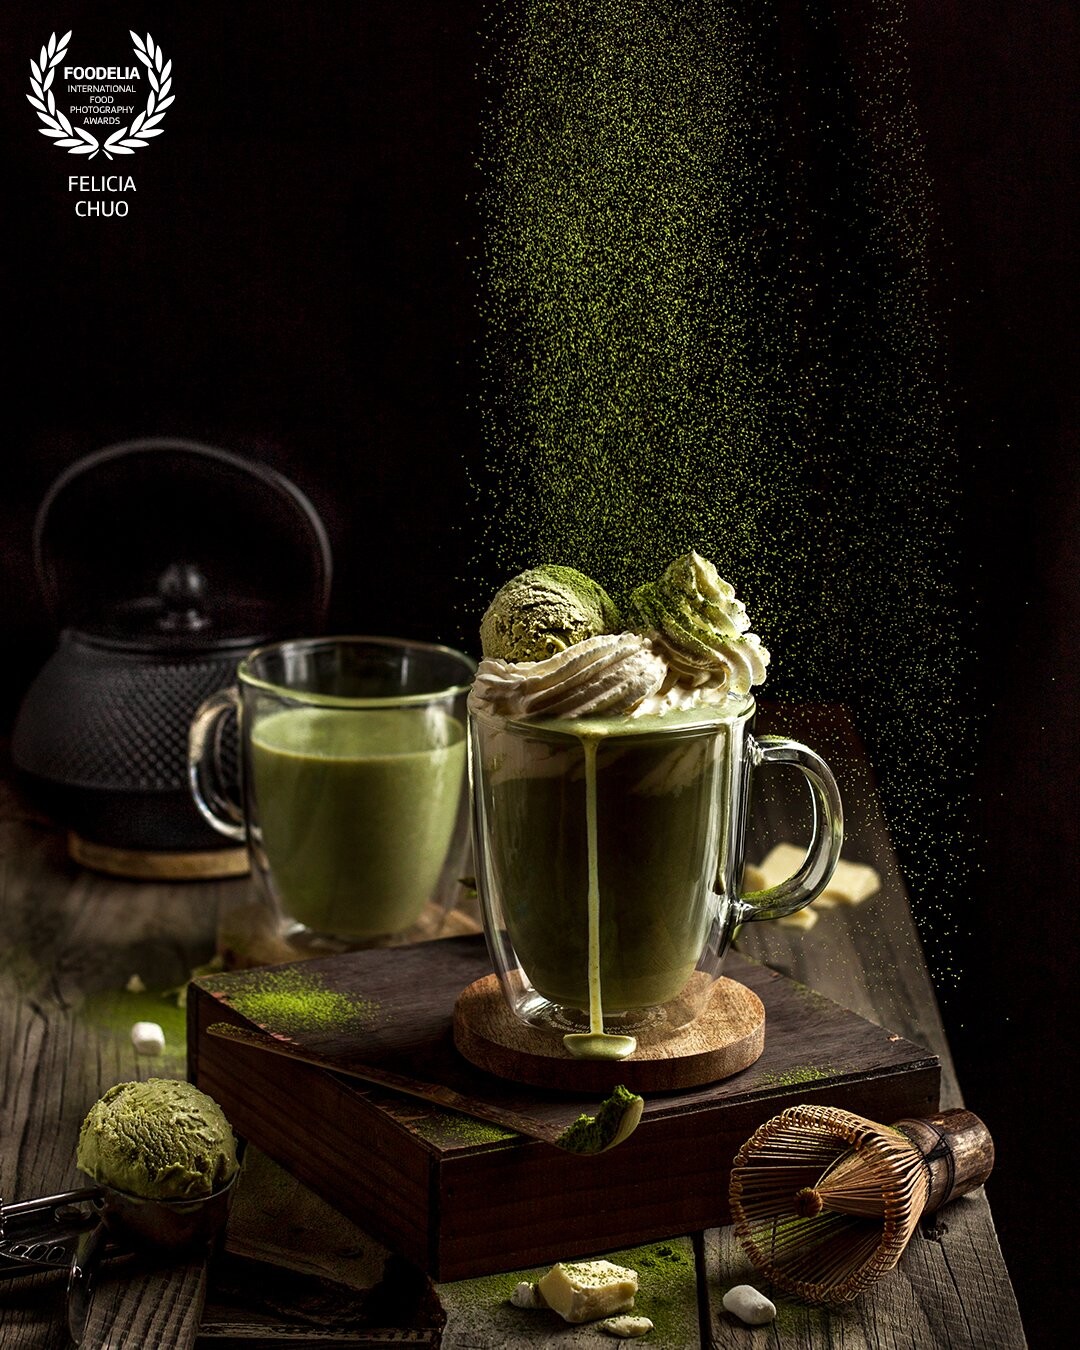 Wanted a rich, moody, and luxurious feel, but with a bit more of a natural edge with the matcha, hence the dark and moody lighting and wooden props. This shot is actually a composite of 5 shots!